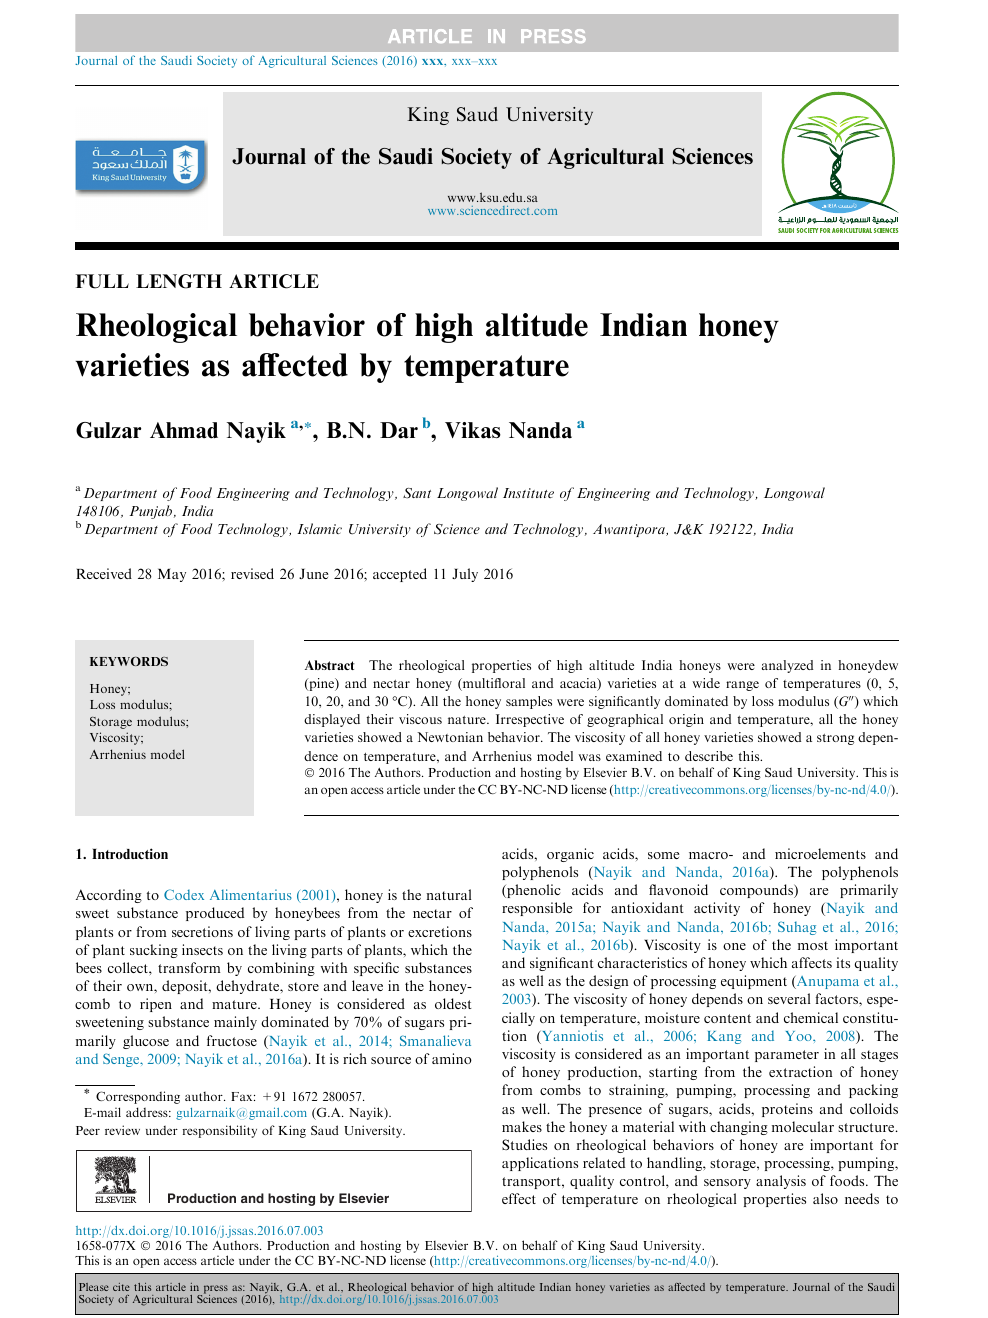 Rheological Behavior Of High Altitude Indian Honey Varieties As Affected By Temperature Topic Of Research Paper In Chemical Sciences Download Scholarly Article Pdf And Read For Free On Cyberleninka Open Science